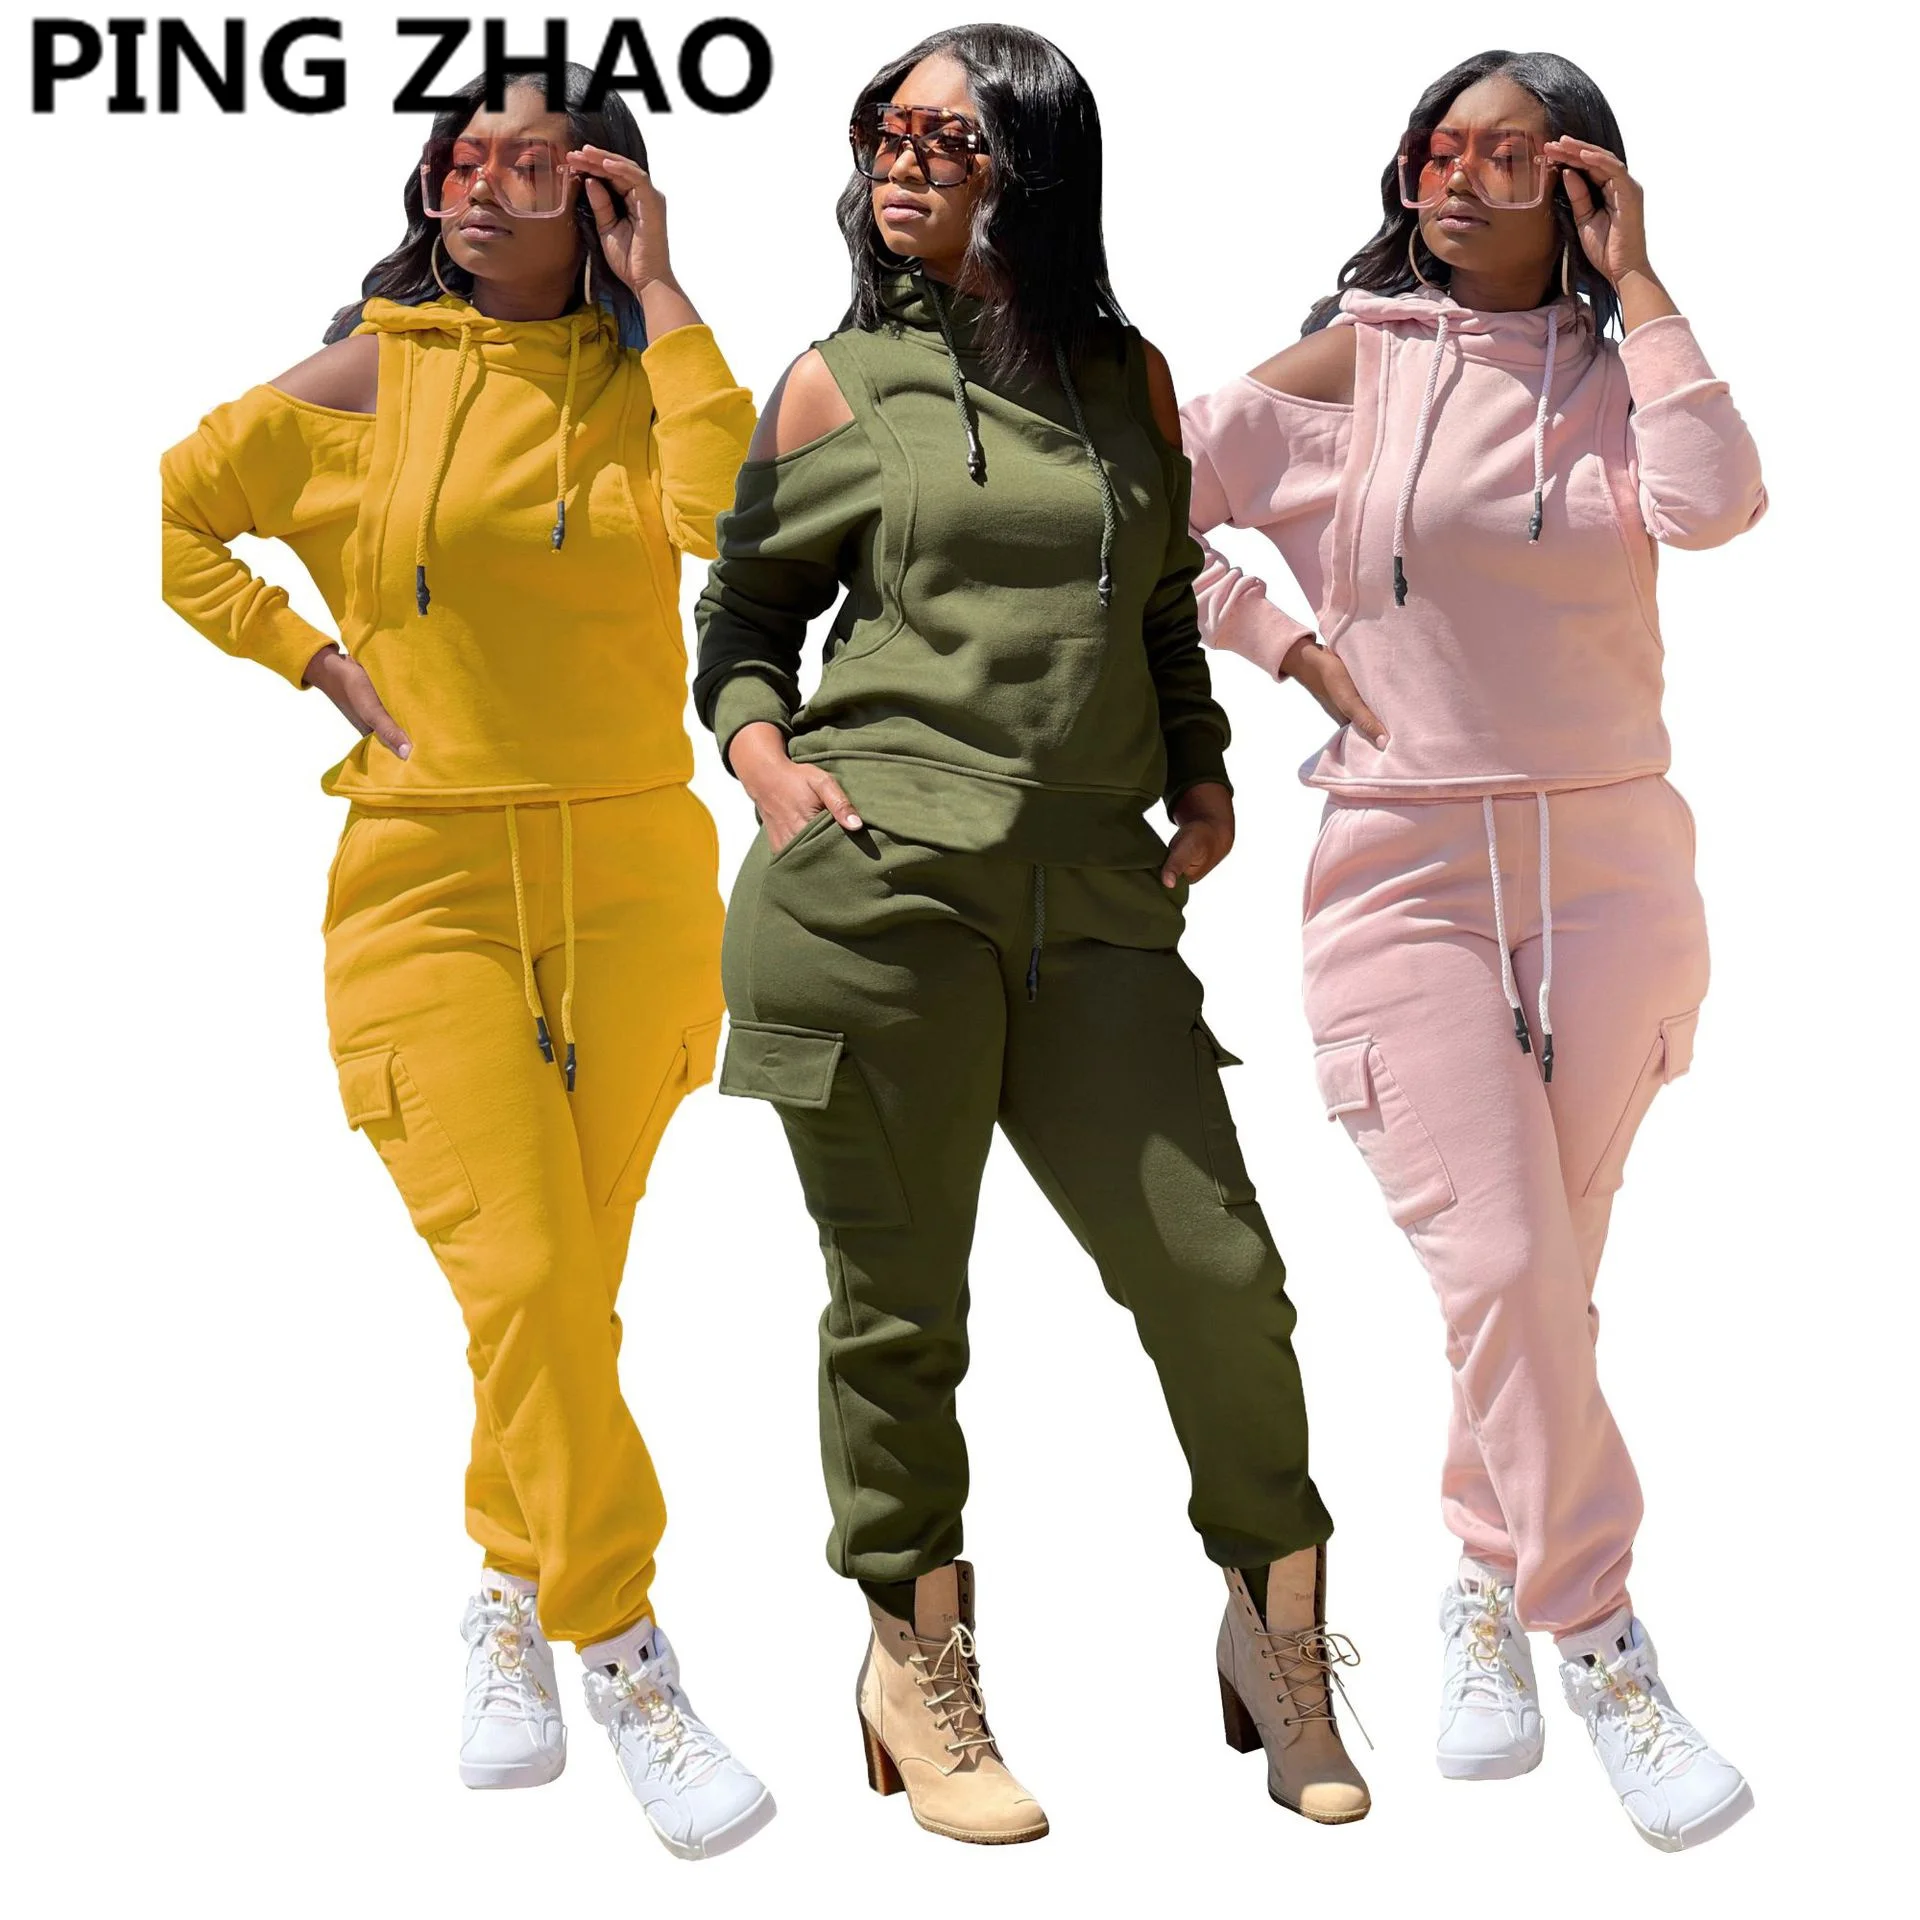 

PING ZHAO Sport Tracksuit Women Long Sleeve Dew Shoulder Hooded Tops+ Running Pants Two Piece Set Autumn Winter Fashion Outfit